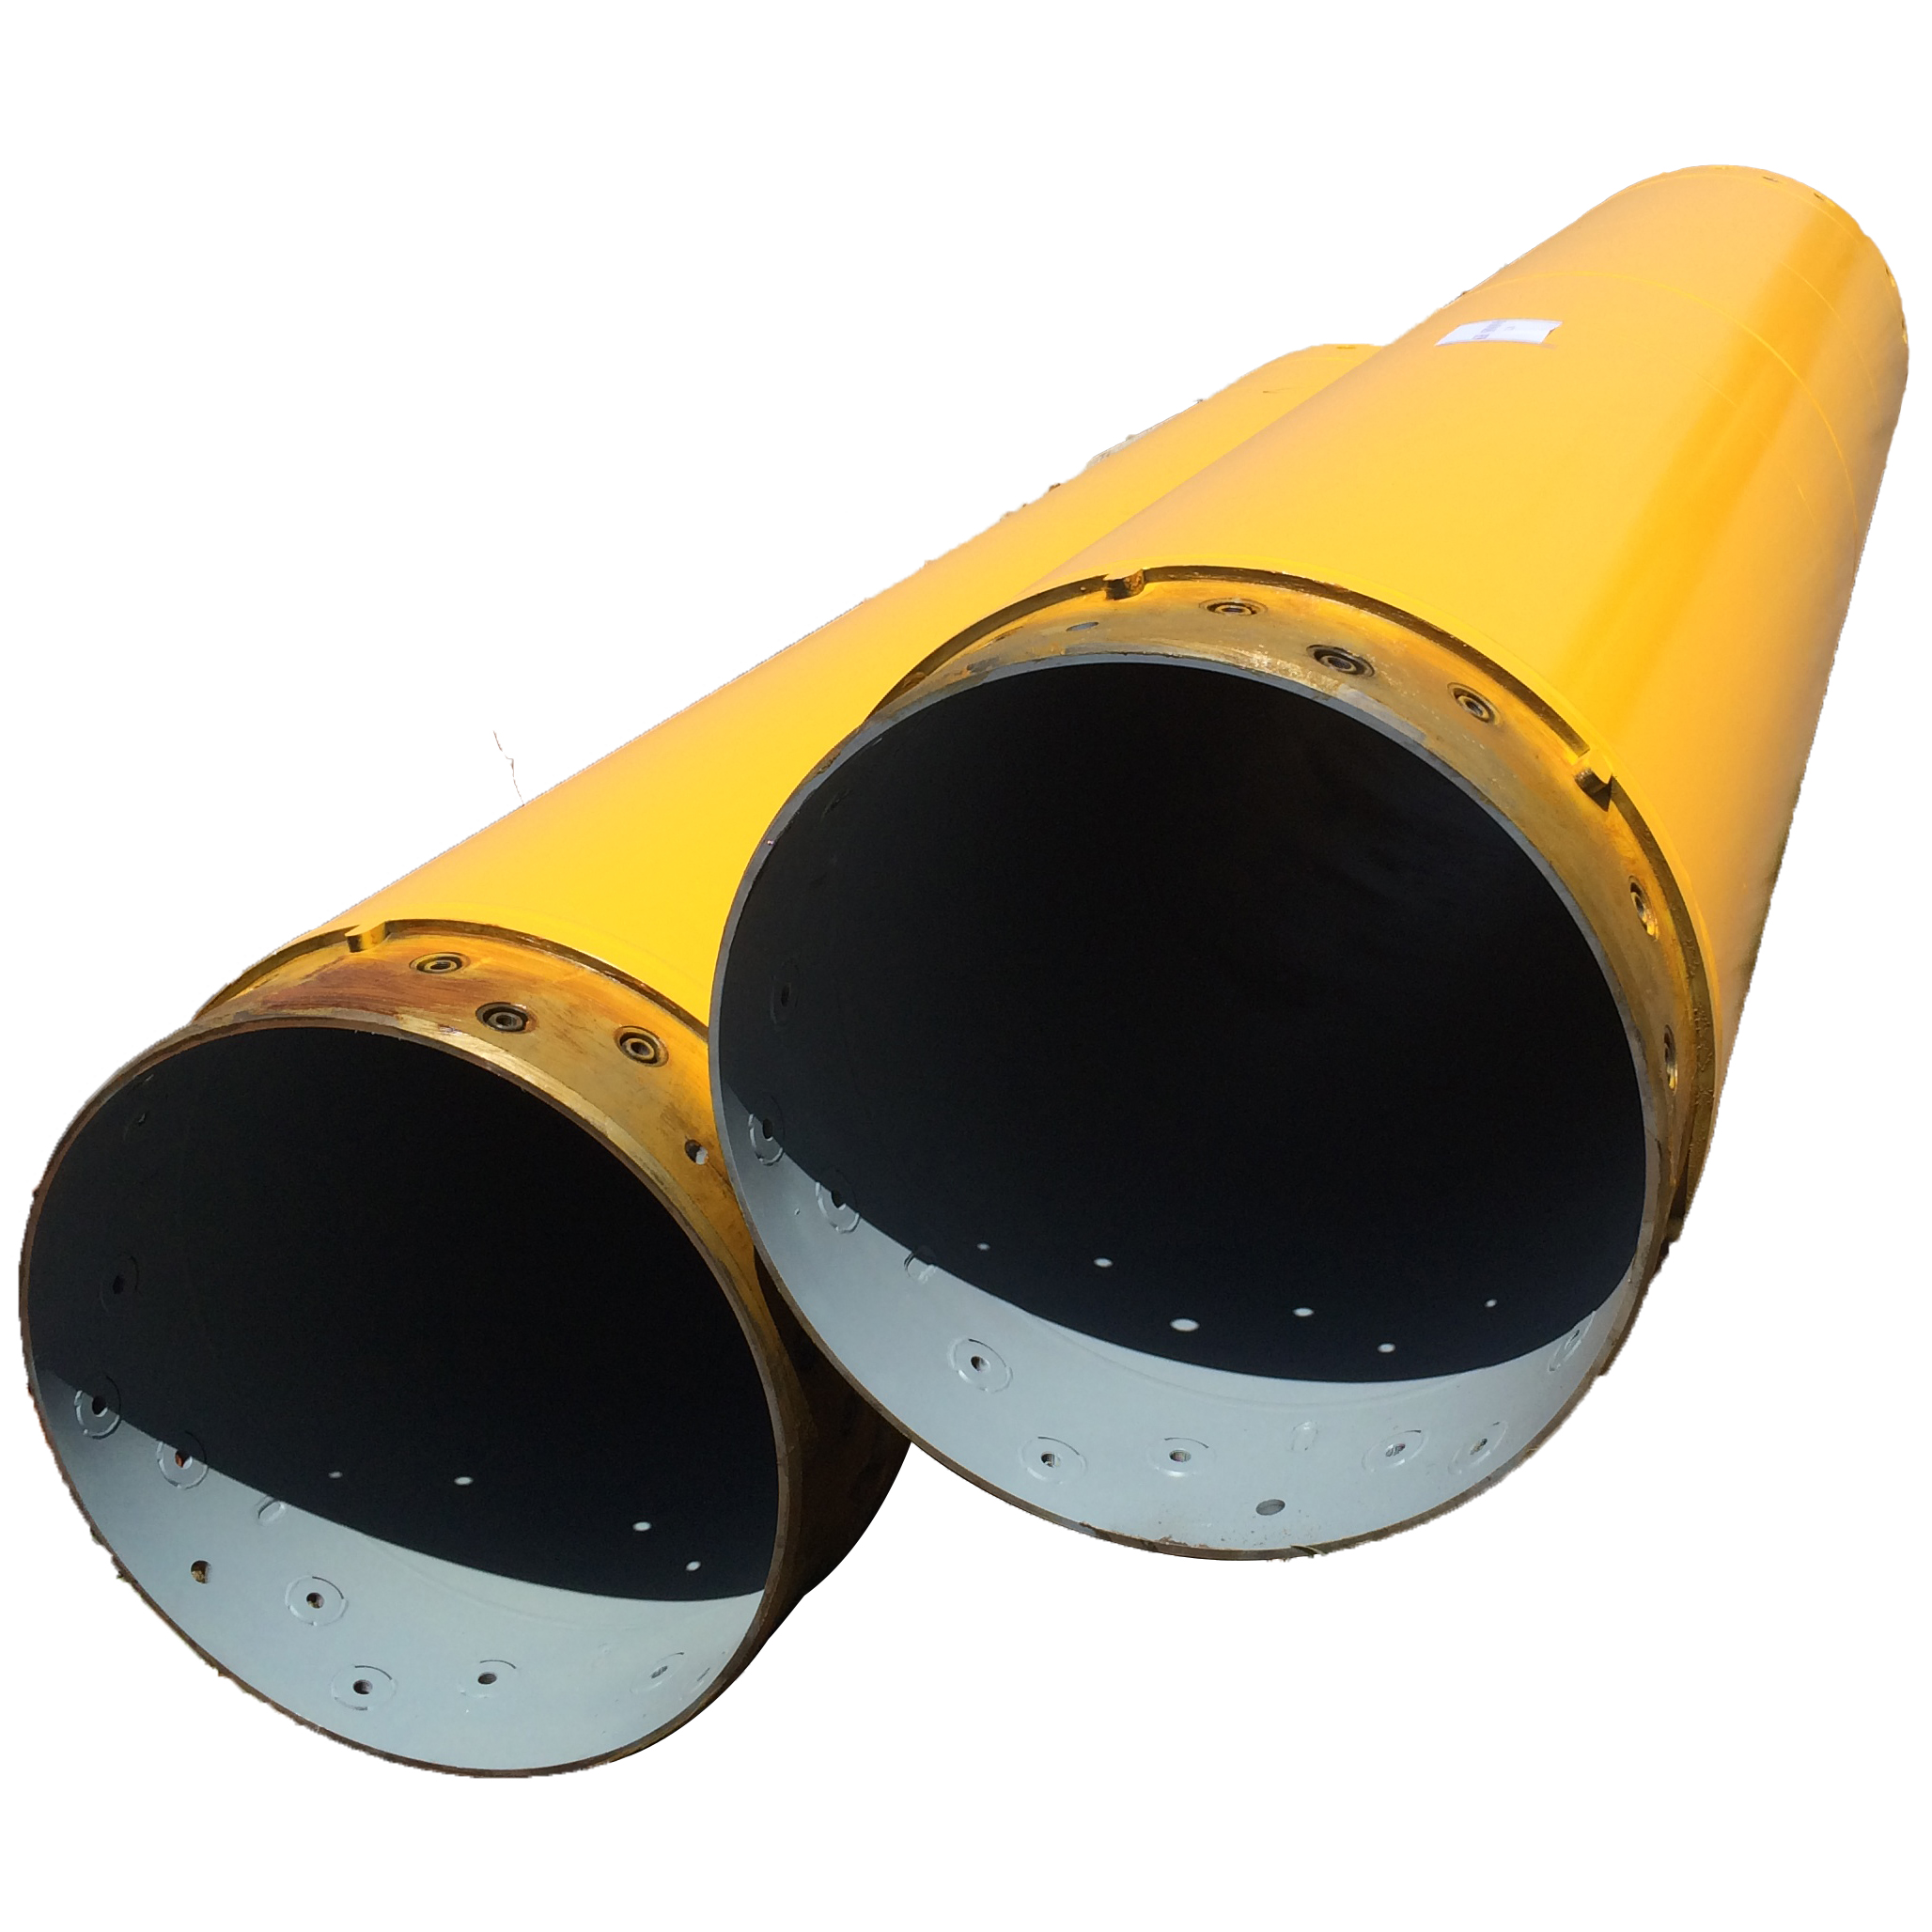 Casing for rotary drilling rig Featured Image